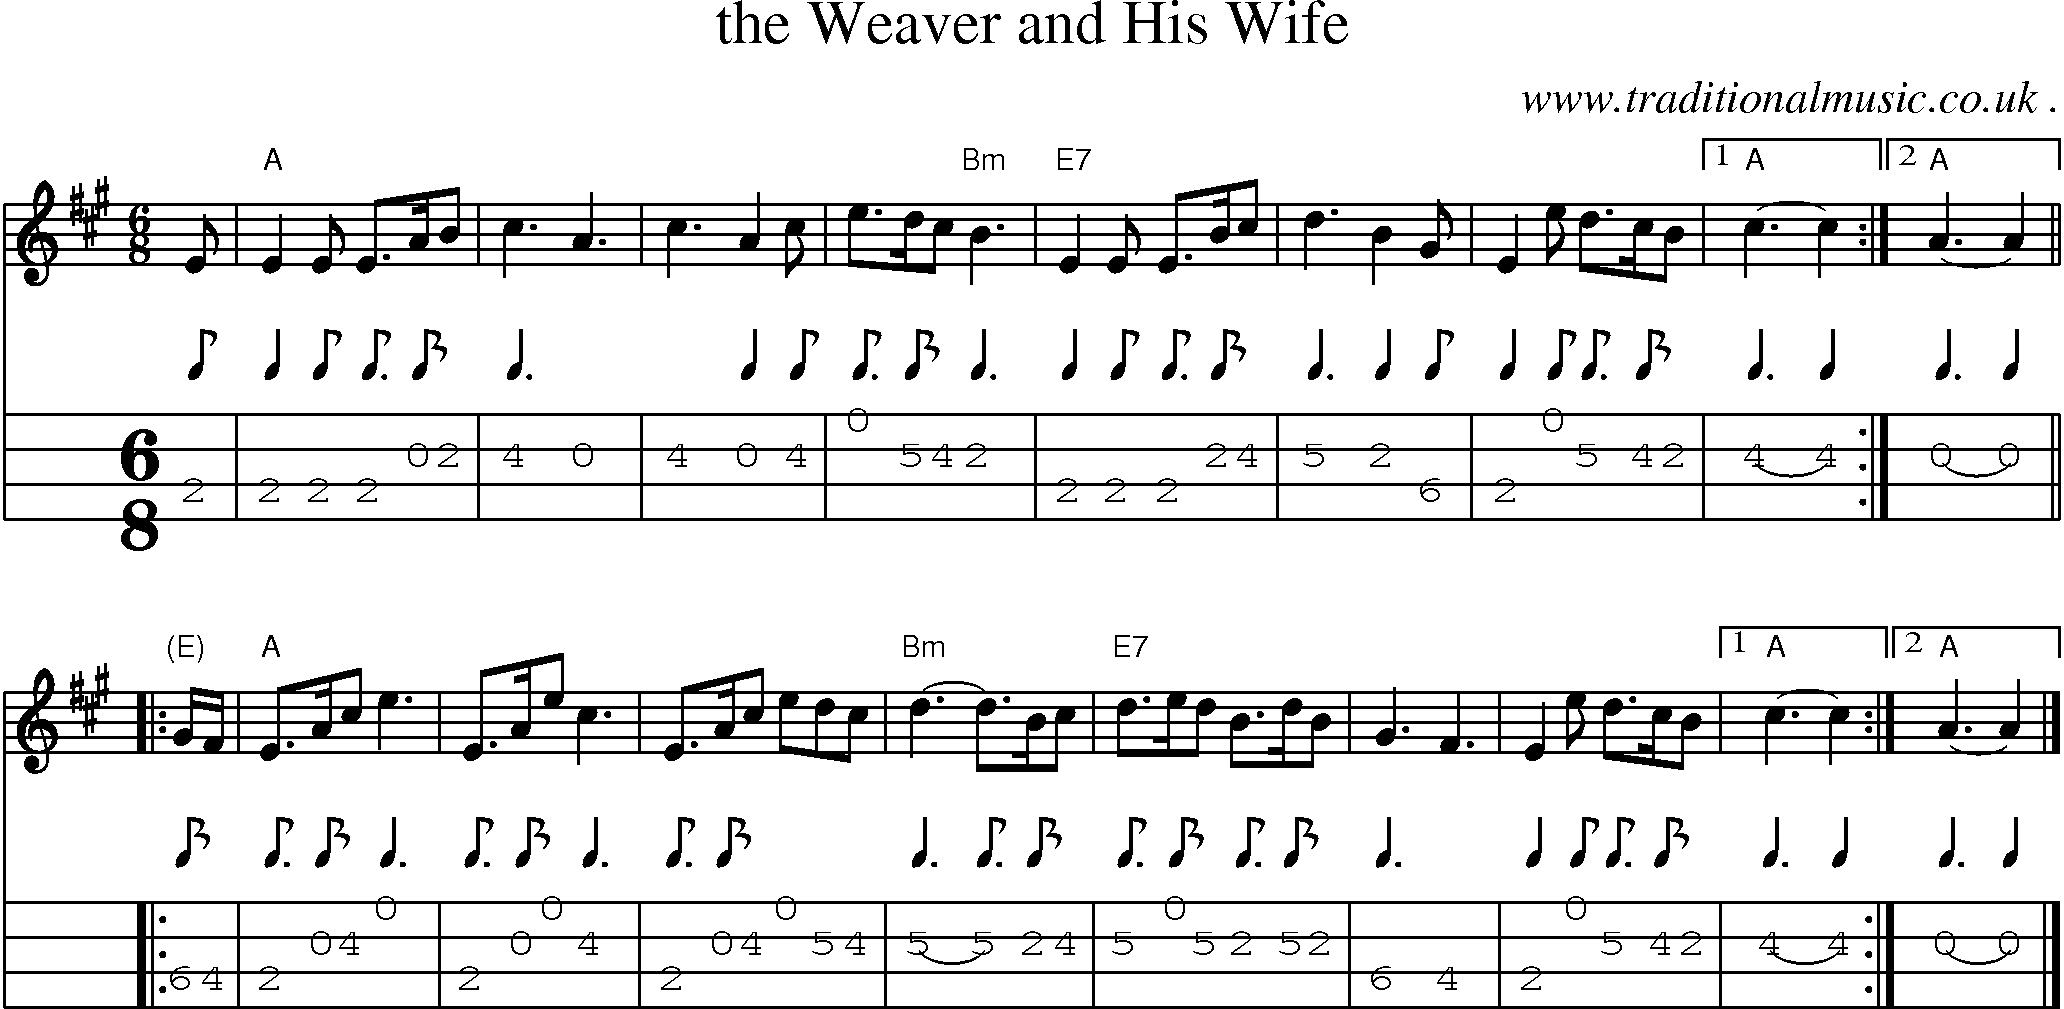 Sheet-music  score, Chords and Mandolin Tabs for The Weaver And His Wife